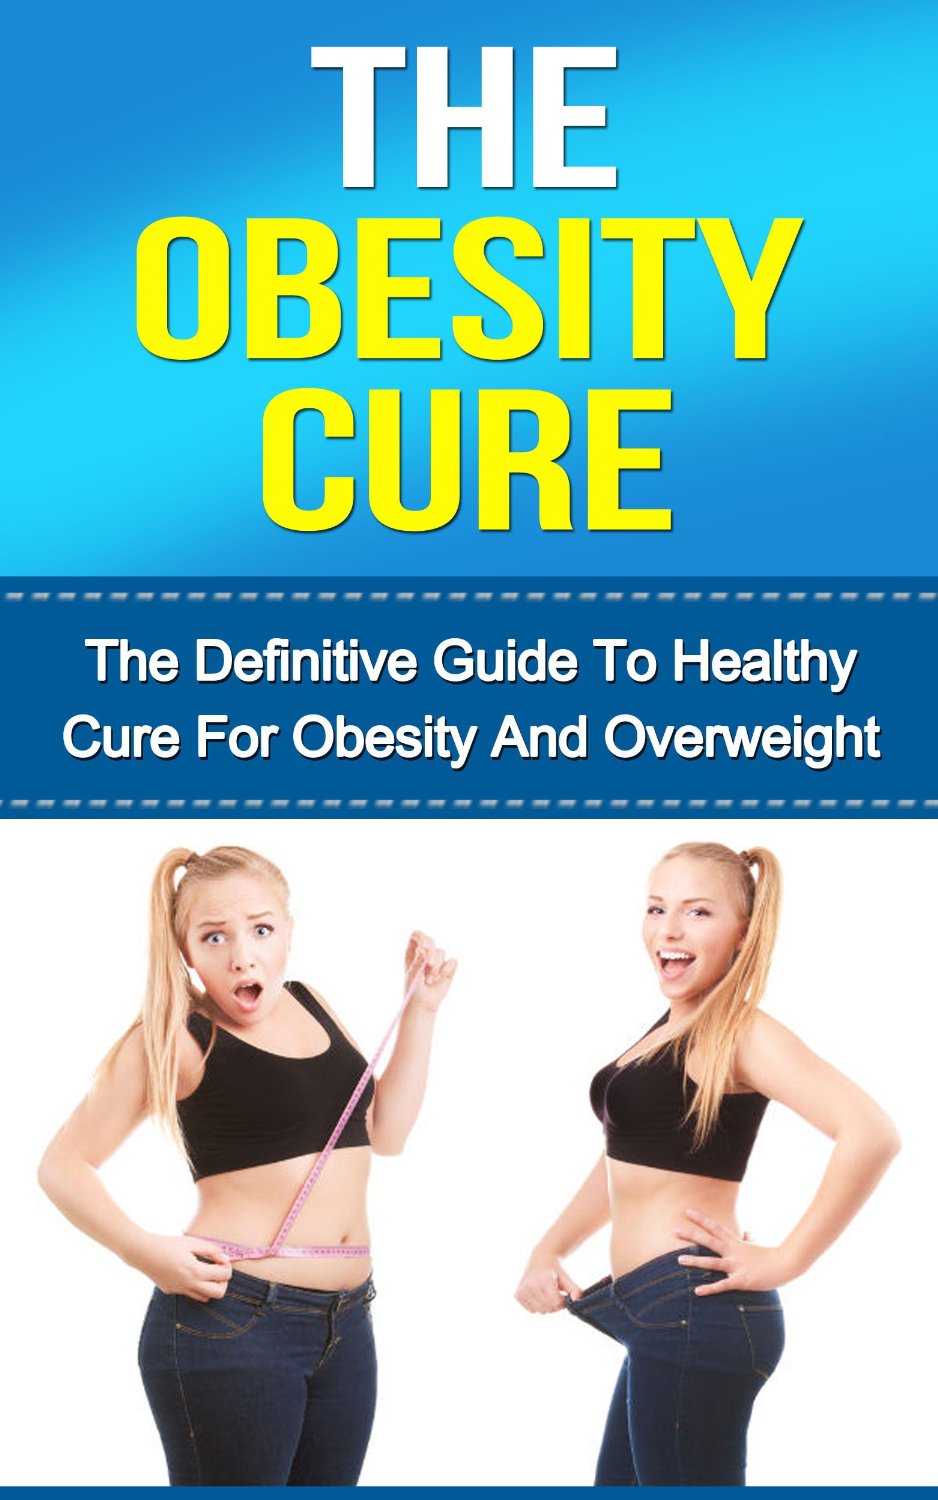 The Obesity Cure: The Definitive Guide To Healthy Cure For Obesity And Overweight by Marjan Bazalac